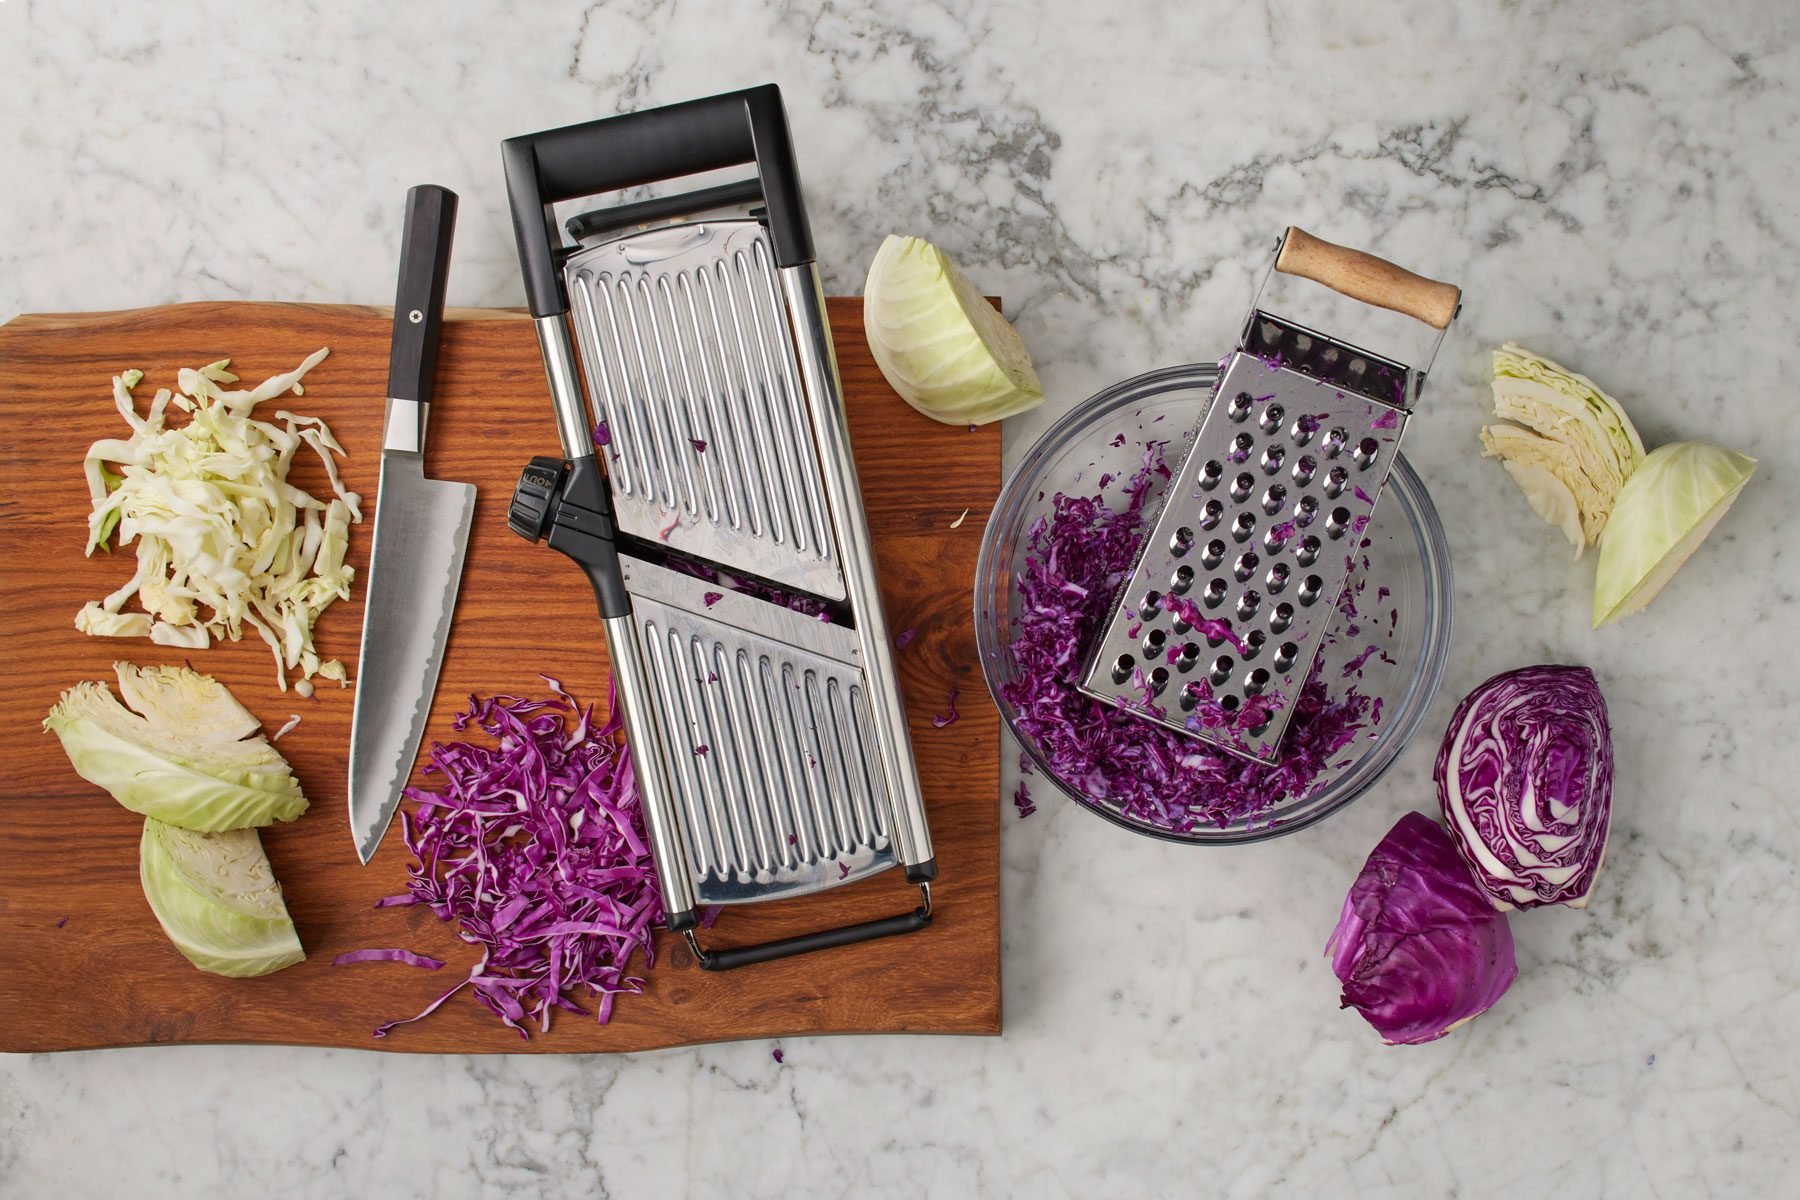 https://www.tasteofhome.com/wp-content/uploads/2019/04/How-to-Shred-Cabbage-TOHPL23_PU6186-_DR_03_02_14-FT.jpg